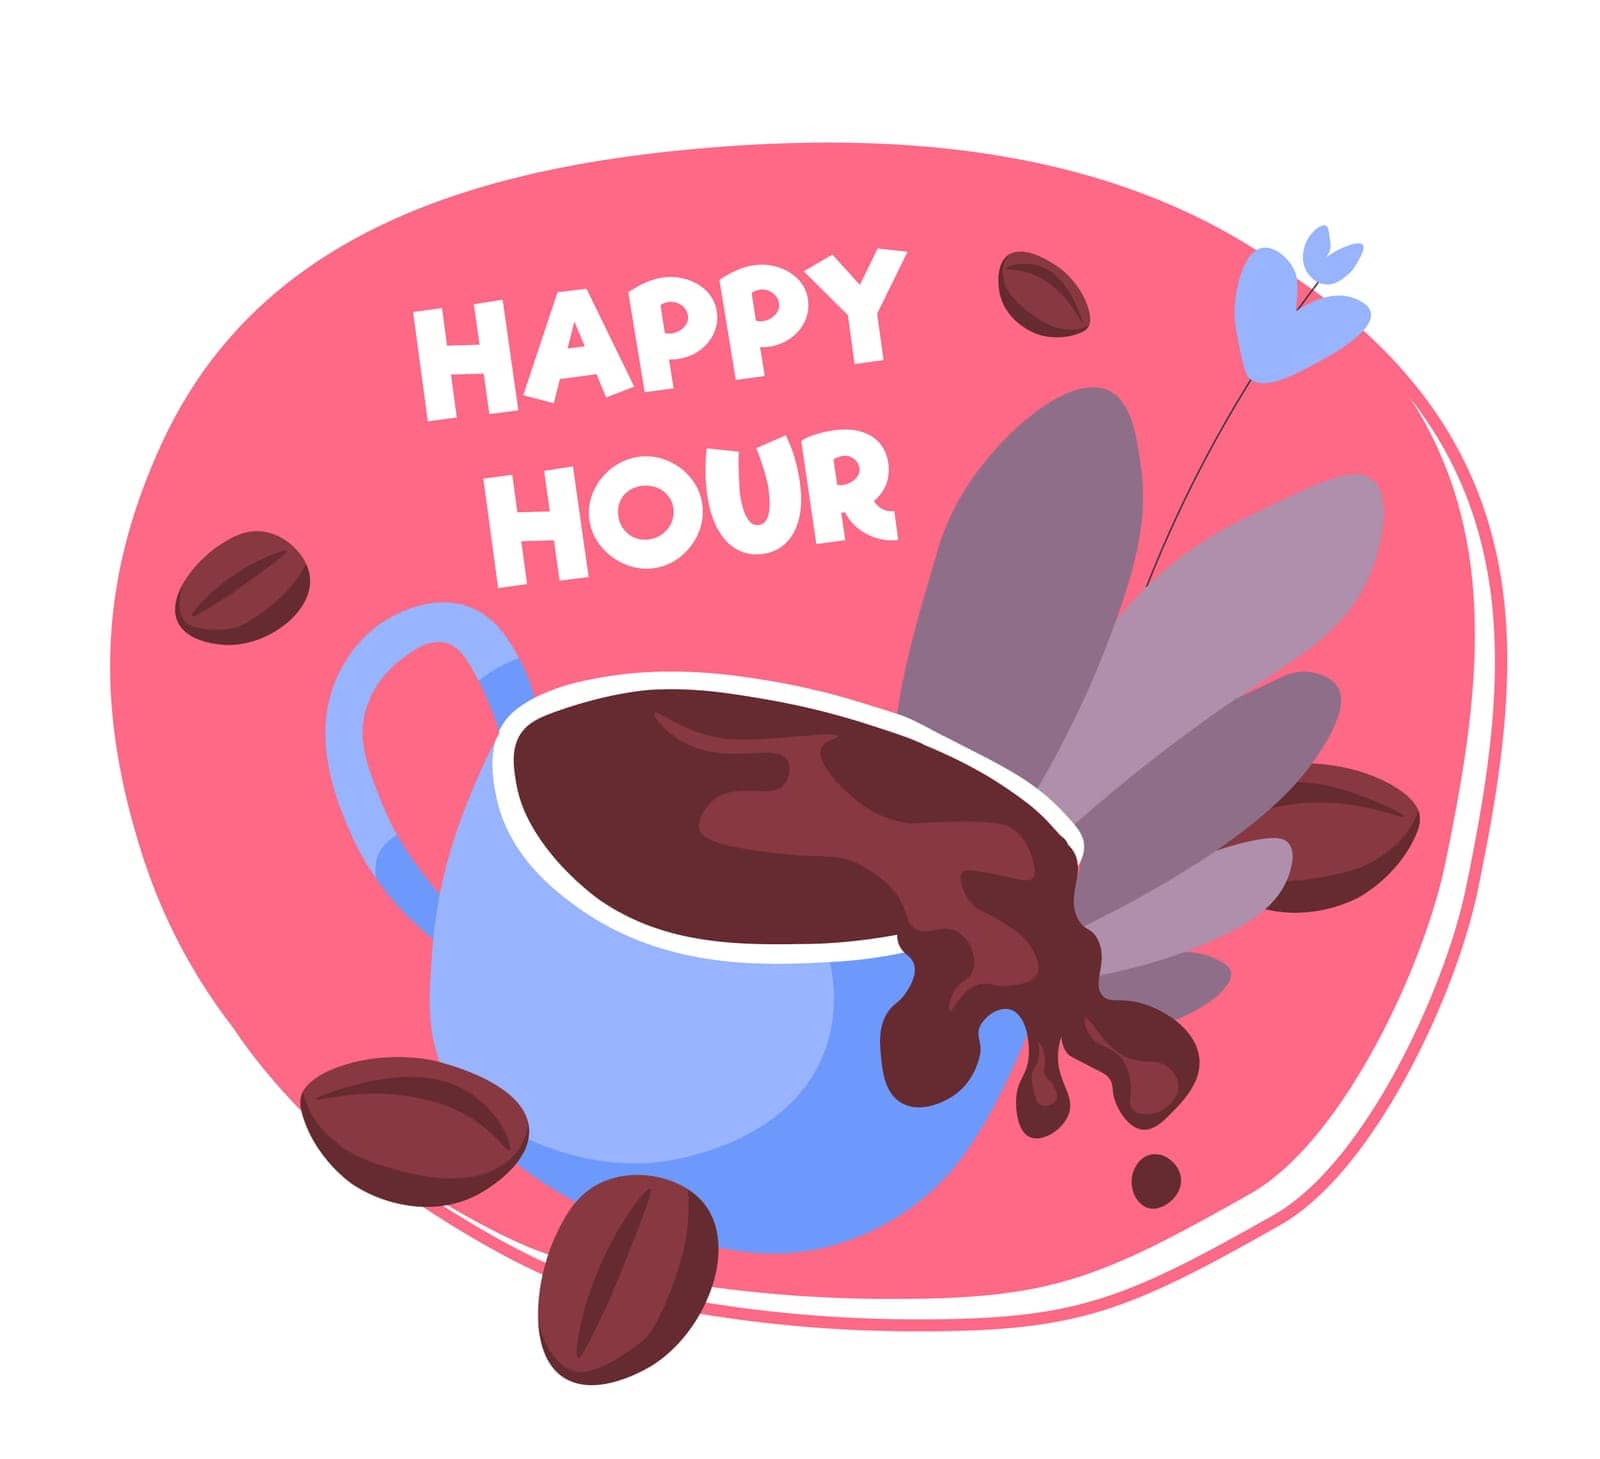 Happy hour in coffee house, cafe drinks vector by Sonulkaster